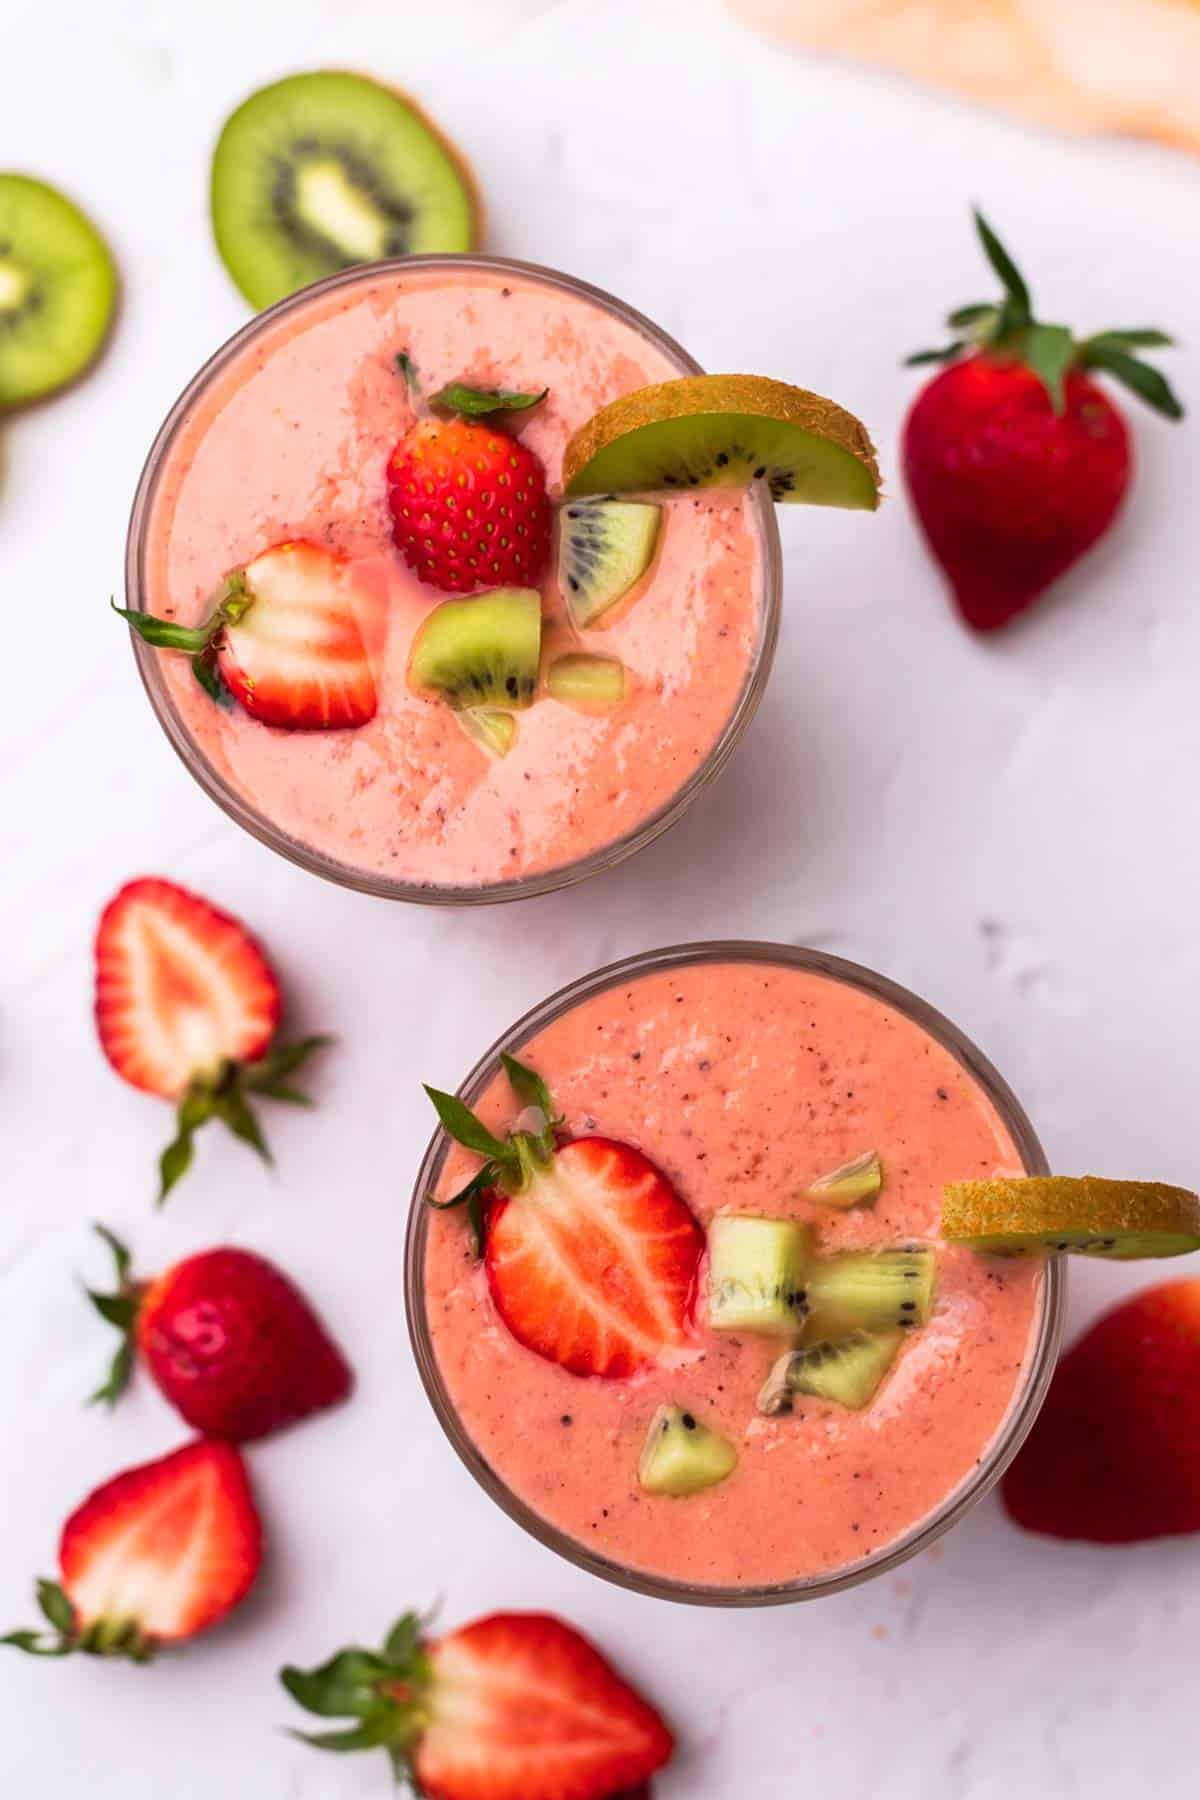 Two Glasses of Kiwi Quencher Tropical Smoothie decorated with strawberries and kiwis